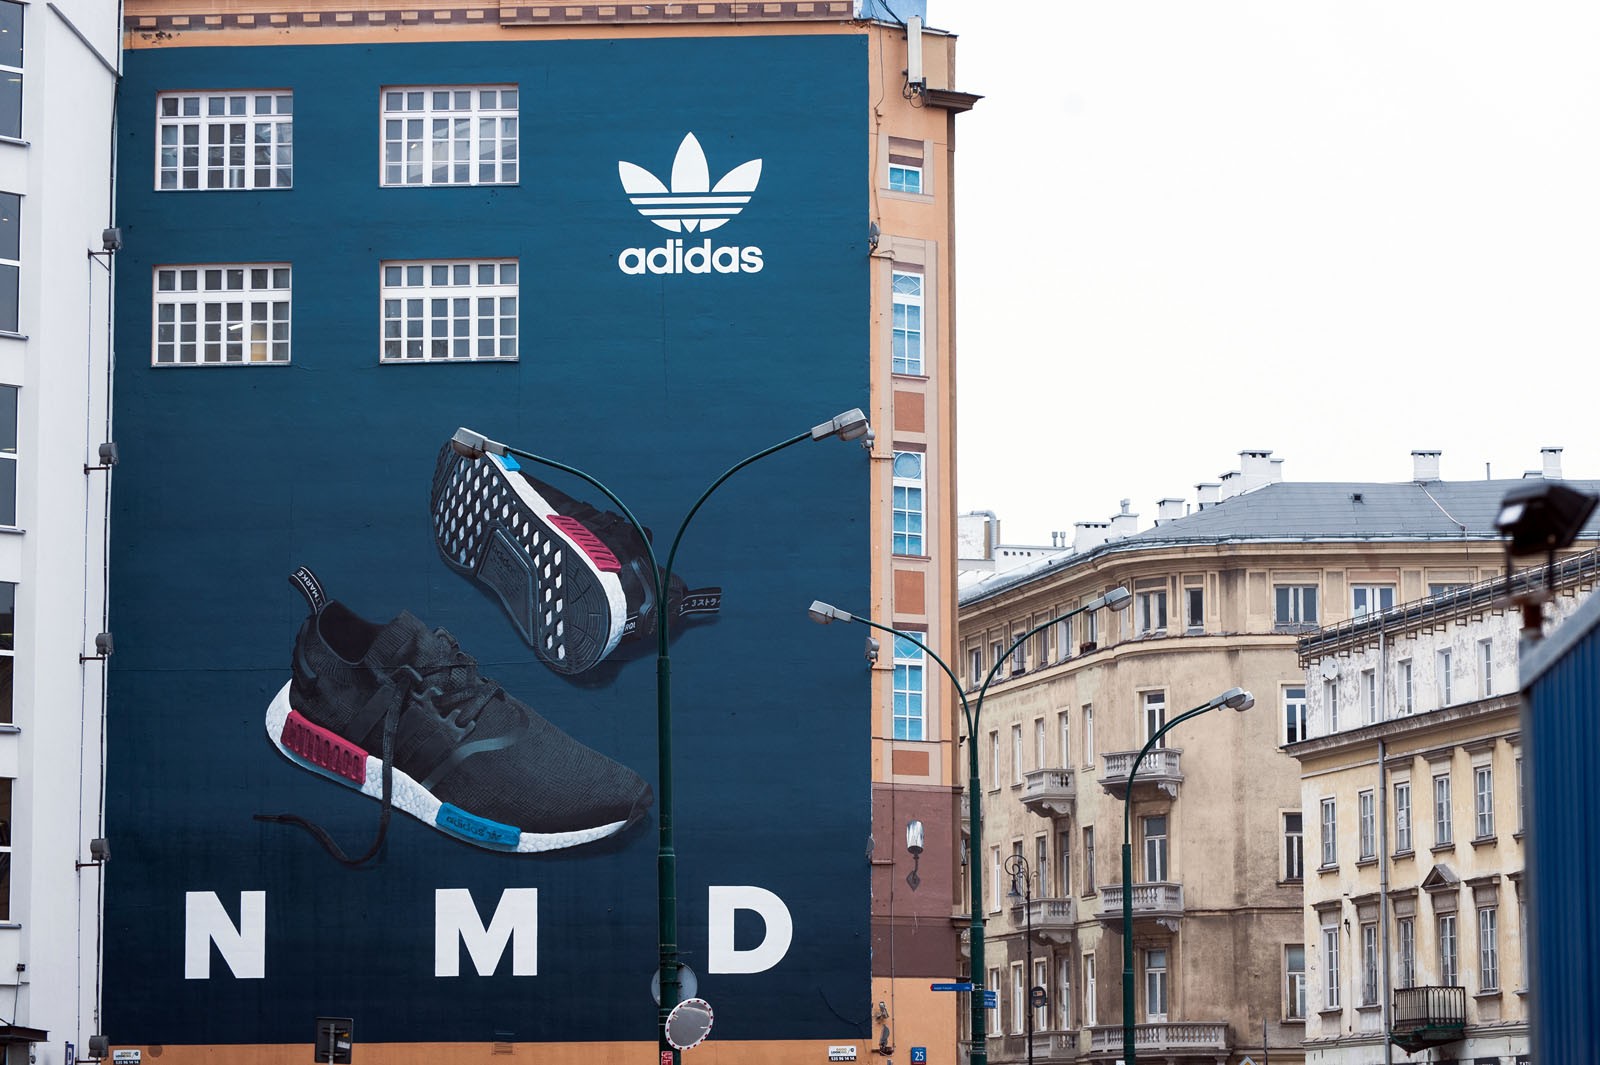 Commercial mural for Adidas brand in Warsaw Bracka Street Polish pre-premiere NMD sneakers | Polish premiere of NMD adidas Originals | Portfolio